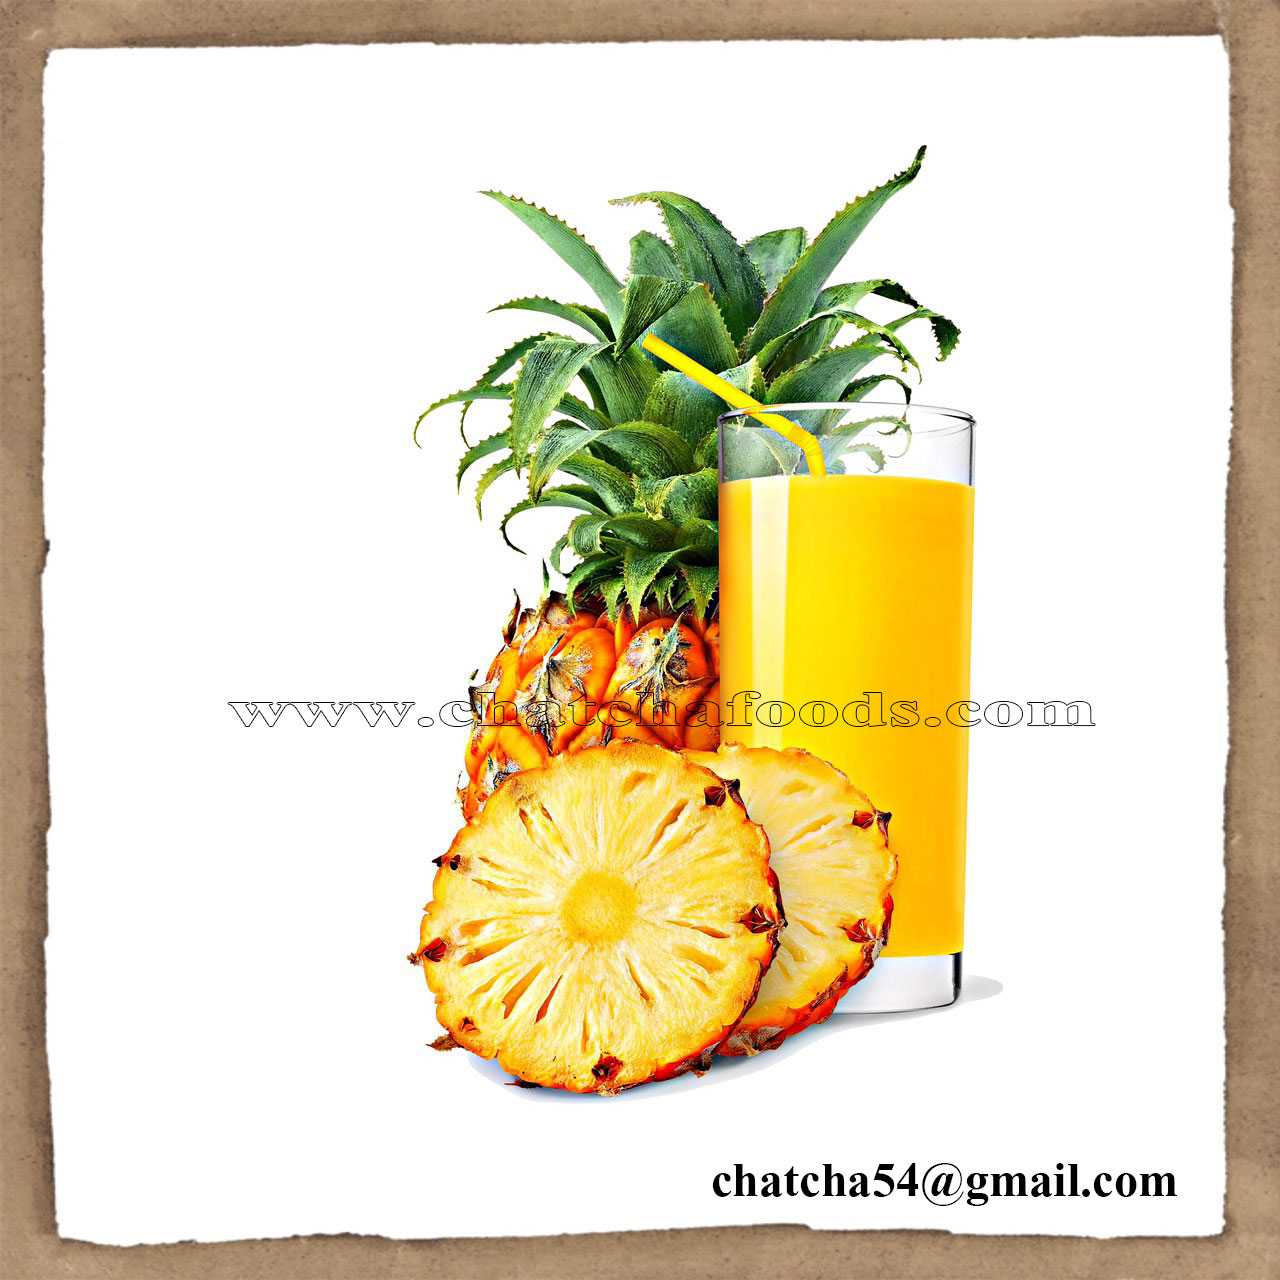 Aseptic pineapple juice concentrate 65 brix